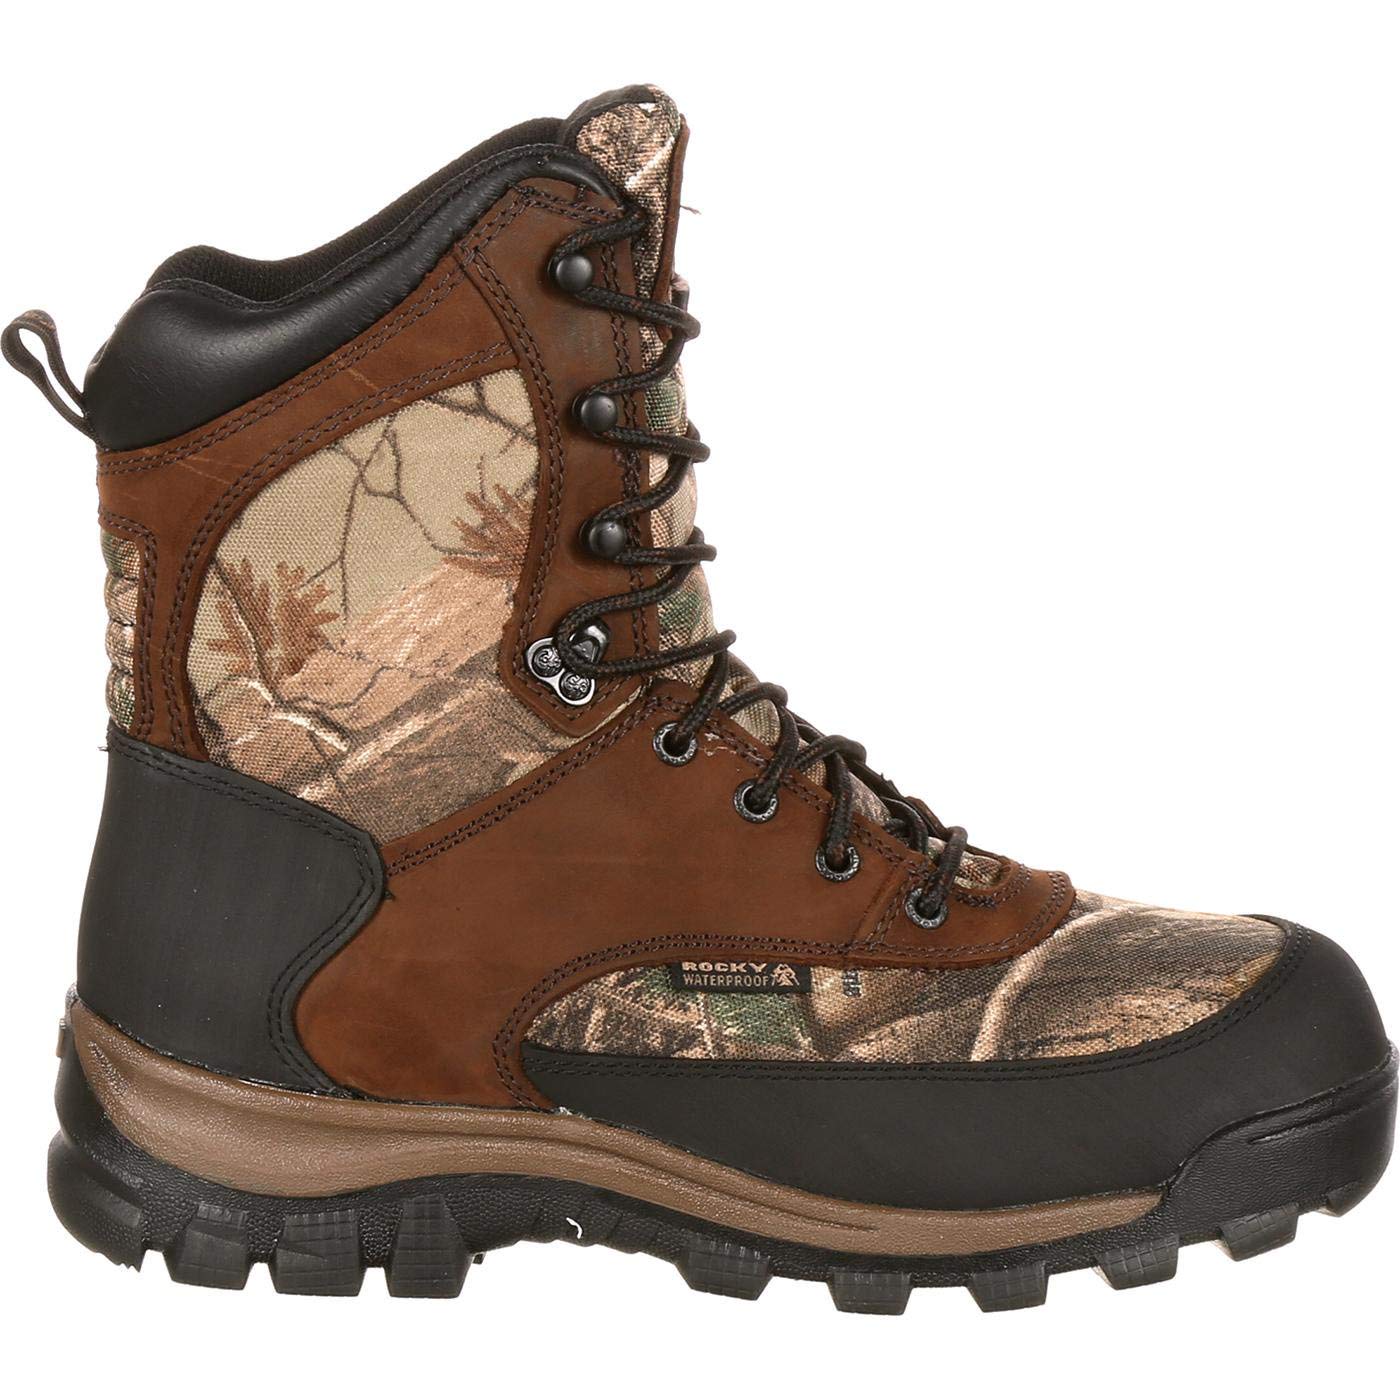 400g insulated work boots